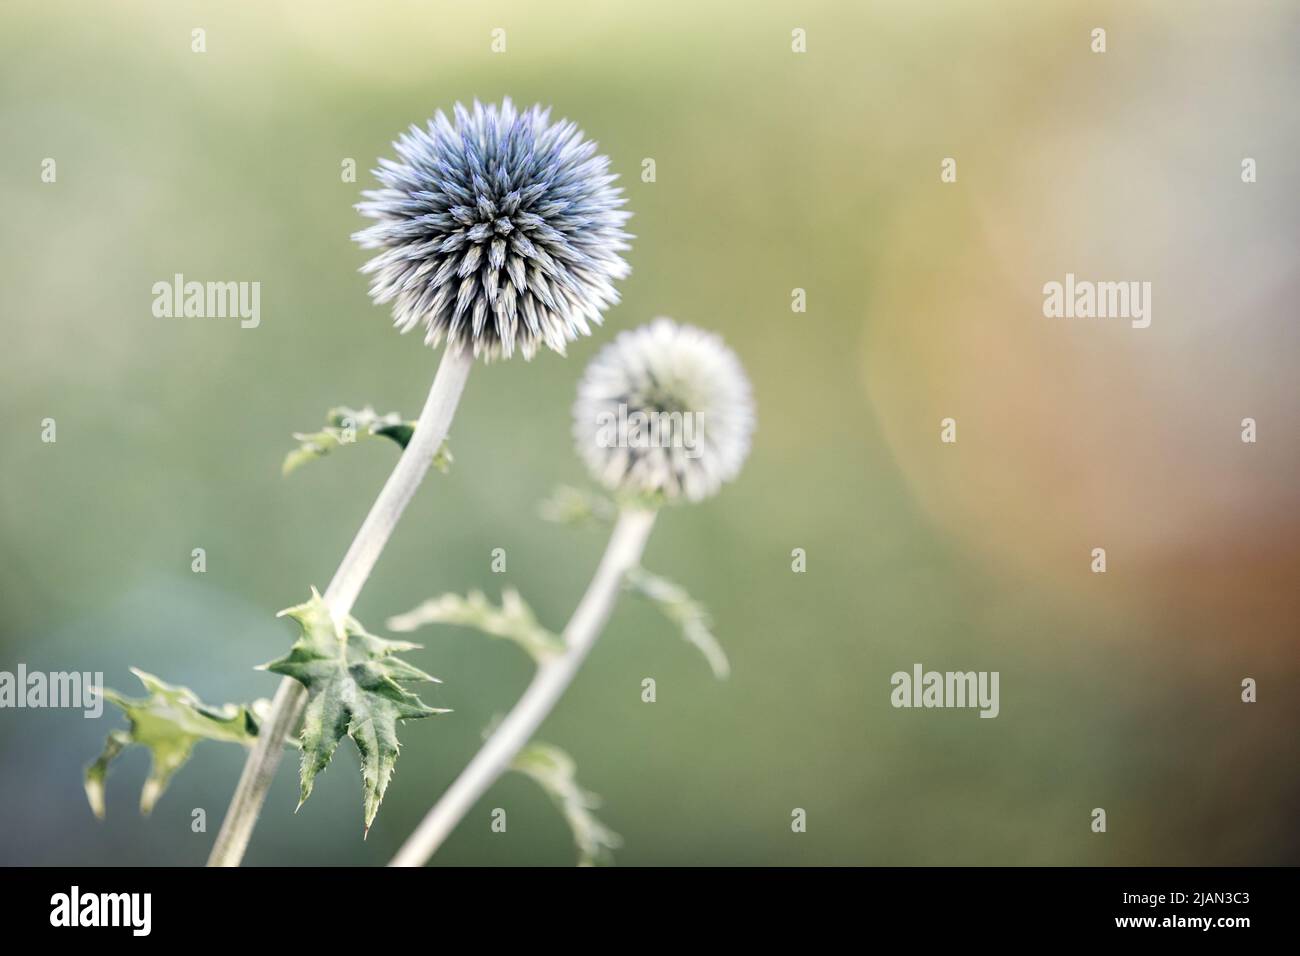 Eryngium alpinum is a perennial herb in the Umbelliferae family. Concept summer and flower background. Stock Photo